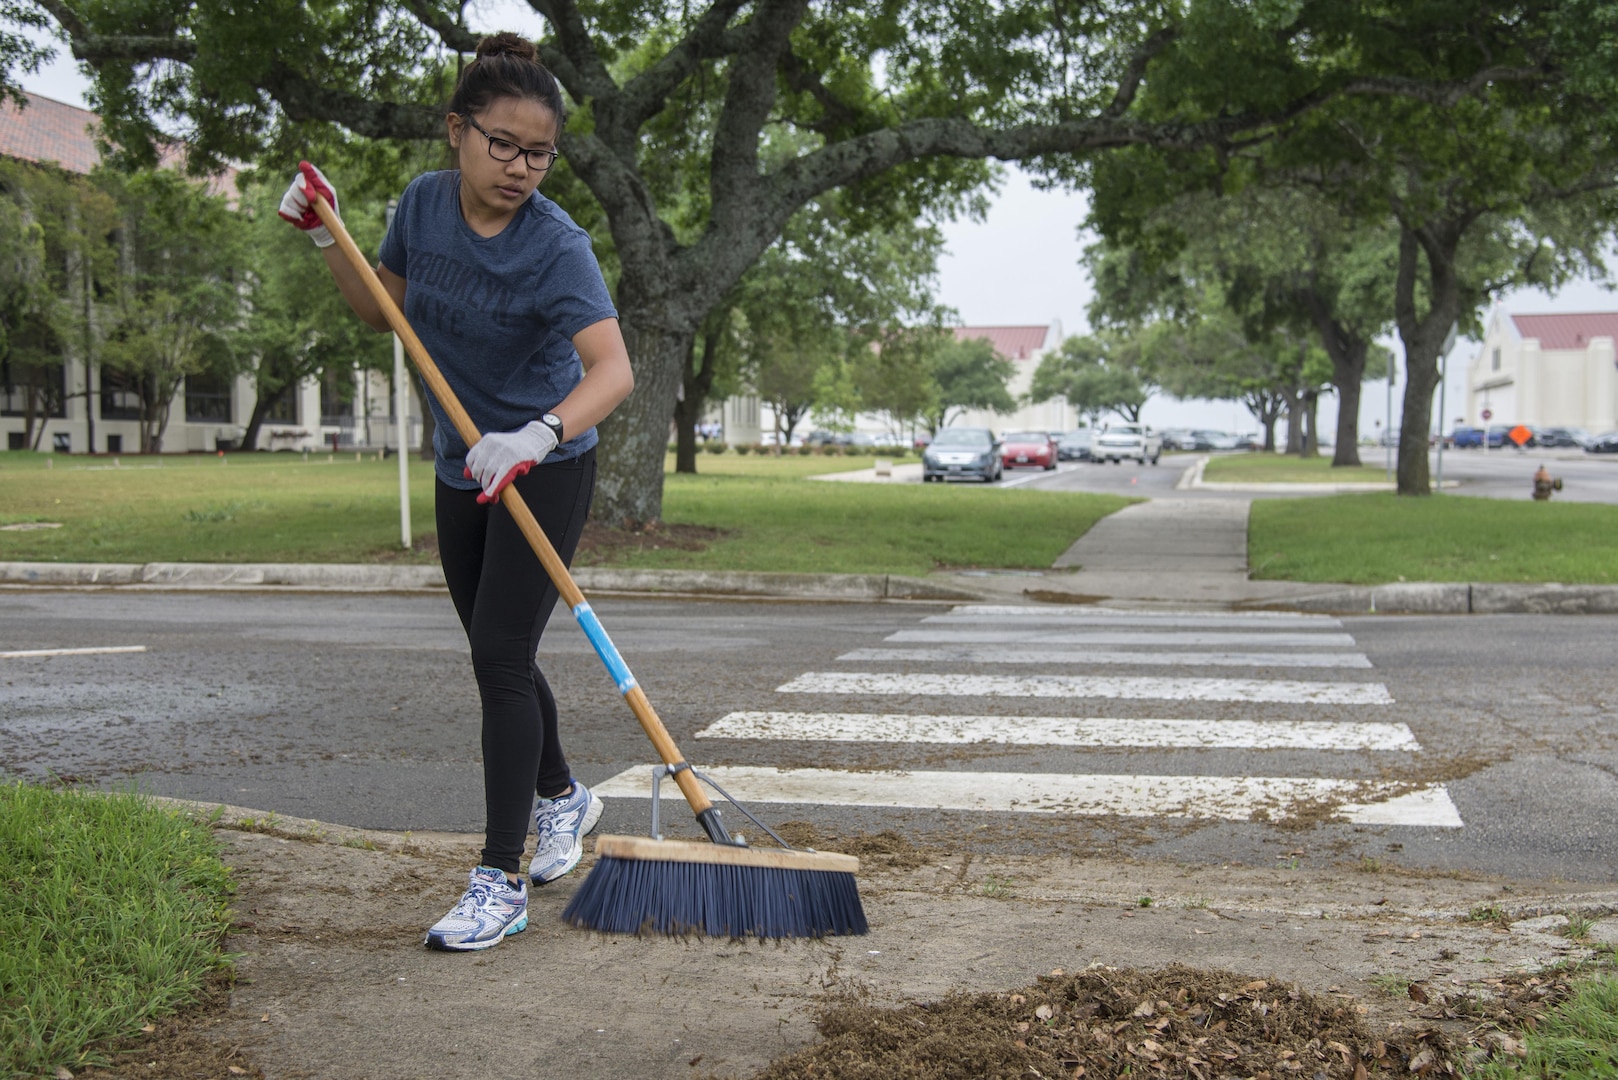 Airman 1st Class Marnela Tan, Air Force Personnel Center/DP2 tech-school assignments apprentice, sweeps the side walk outside the AFPC headquarters building April 11 at Joint Base San Antonio-Randolph. The 502nd Air Base Wing in coordination with the 502nd Civil Engineer Squadron conducted Proud Week Spring Cleanup to unite mission partners, tenant units, organizations and agencies throughout JBSA in an effort to enhance the appearance and beautification of JBSA and its facilities, conduct environmental maintenance and create a clean work environment.